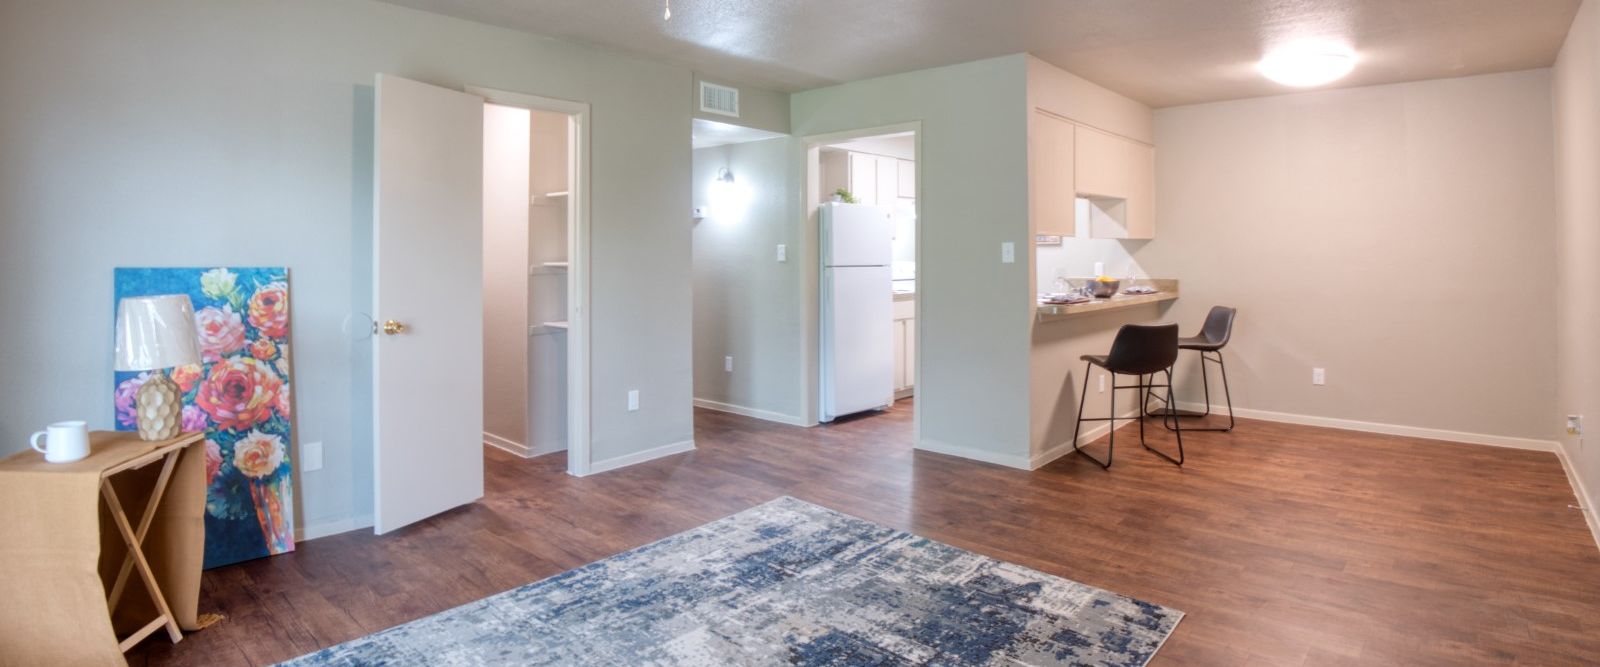 <div class="hidden"><h1>See Yourself At Home At Woodforest Chase Apartment Homes</h1>
<h3>Schedule Your Tour Now</h3></div>